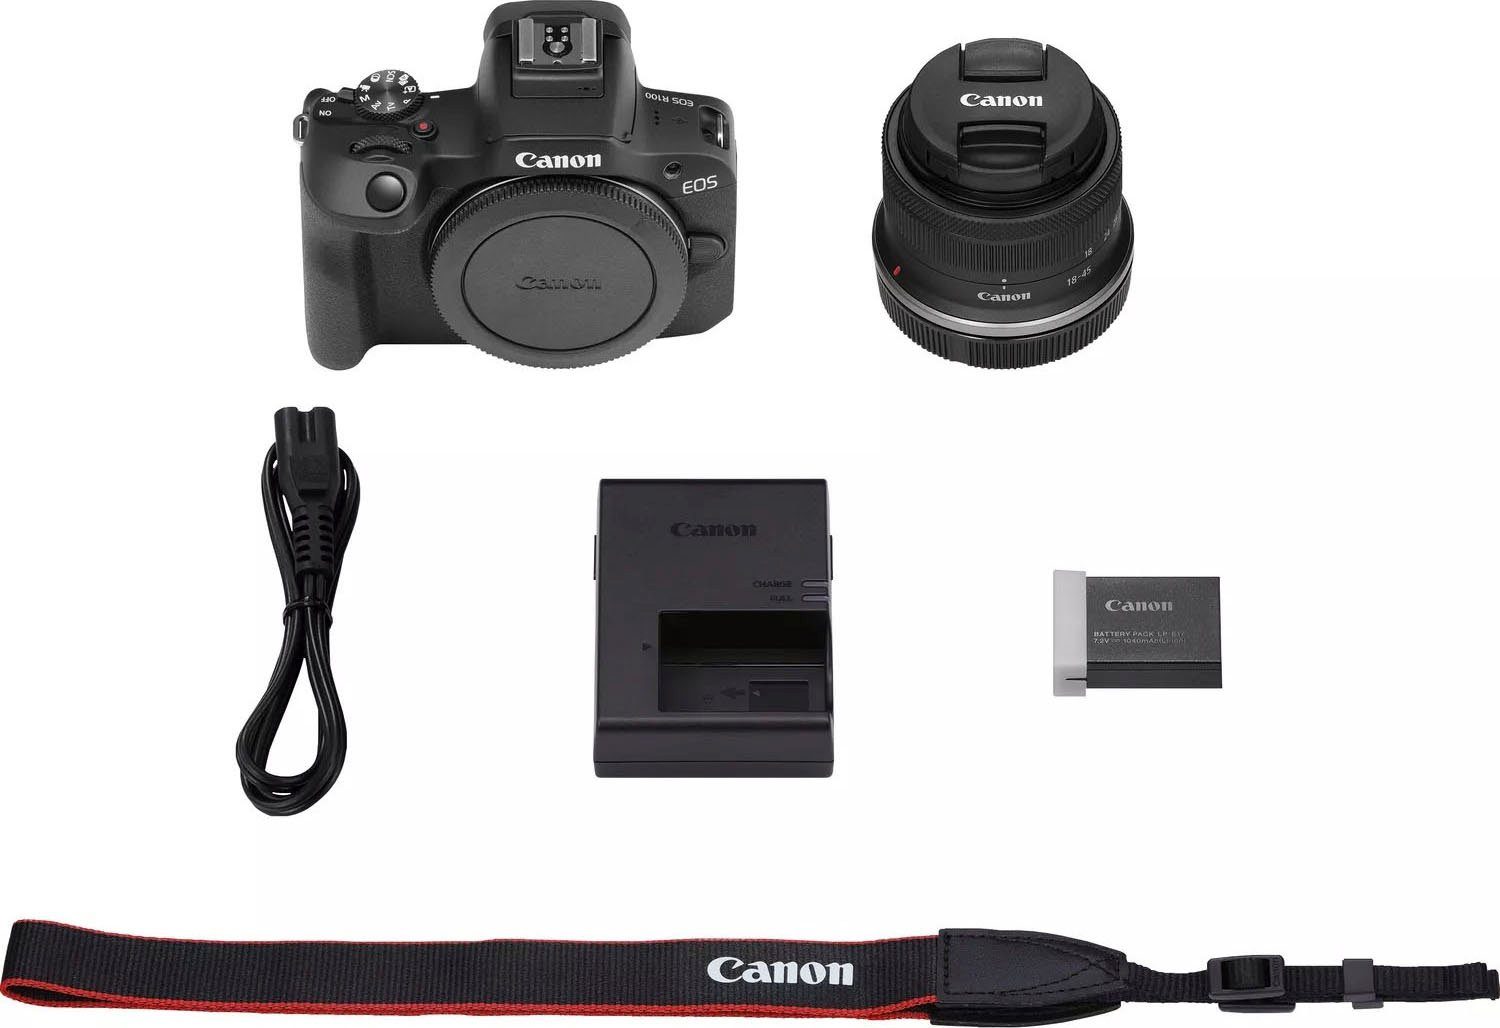 IS F4.5-6.3 STM Kit (RF-S WLAN) F4.5-6.3 EOS Bluetooth, R100 IS 24,1 Canon Systemkamera + STM, MP, RF-S 18-45mm 18-45mm